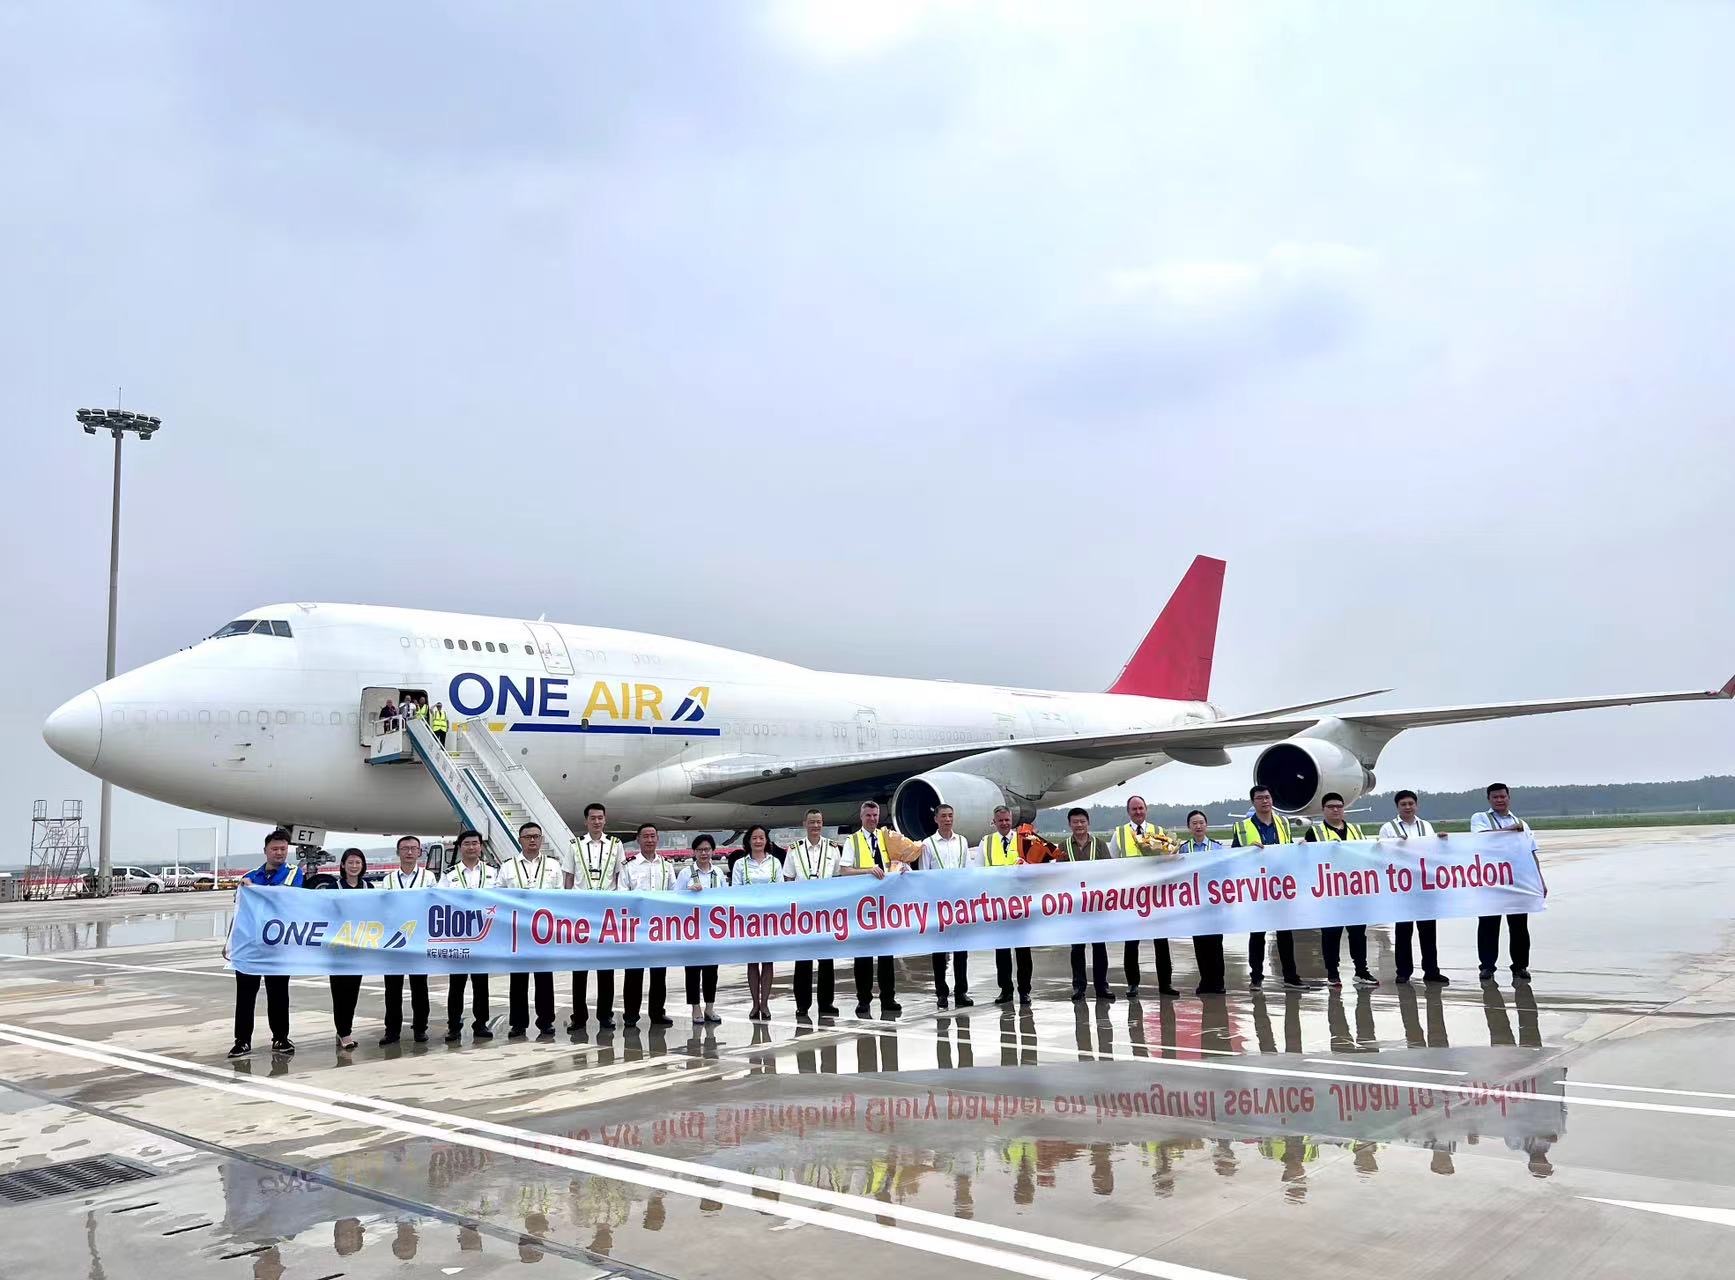 https://www.aircargonews.net/wp-content/uploads/2023/07/Celebrating-in-China-as-One-Airs-first-commercial-flight-prepares-to-depart-from-Jinan-Shandong.jpg